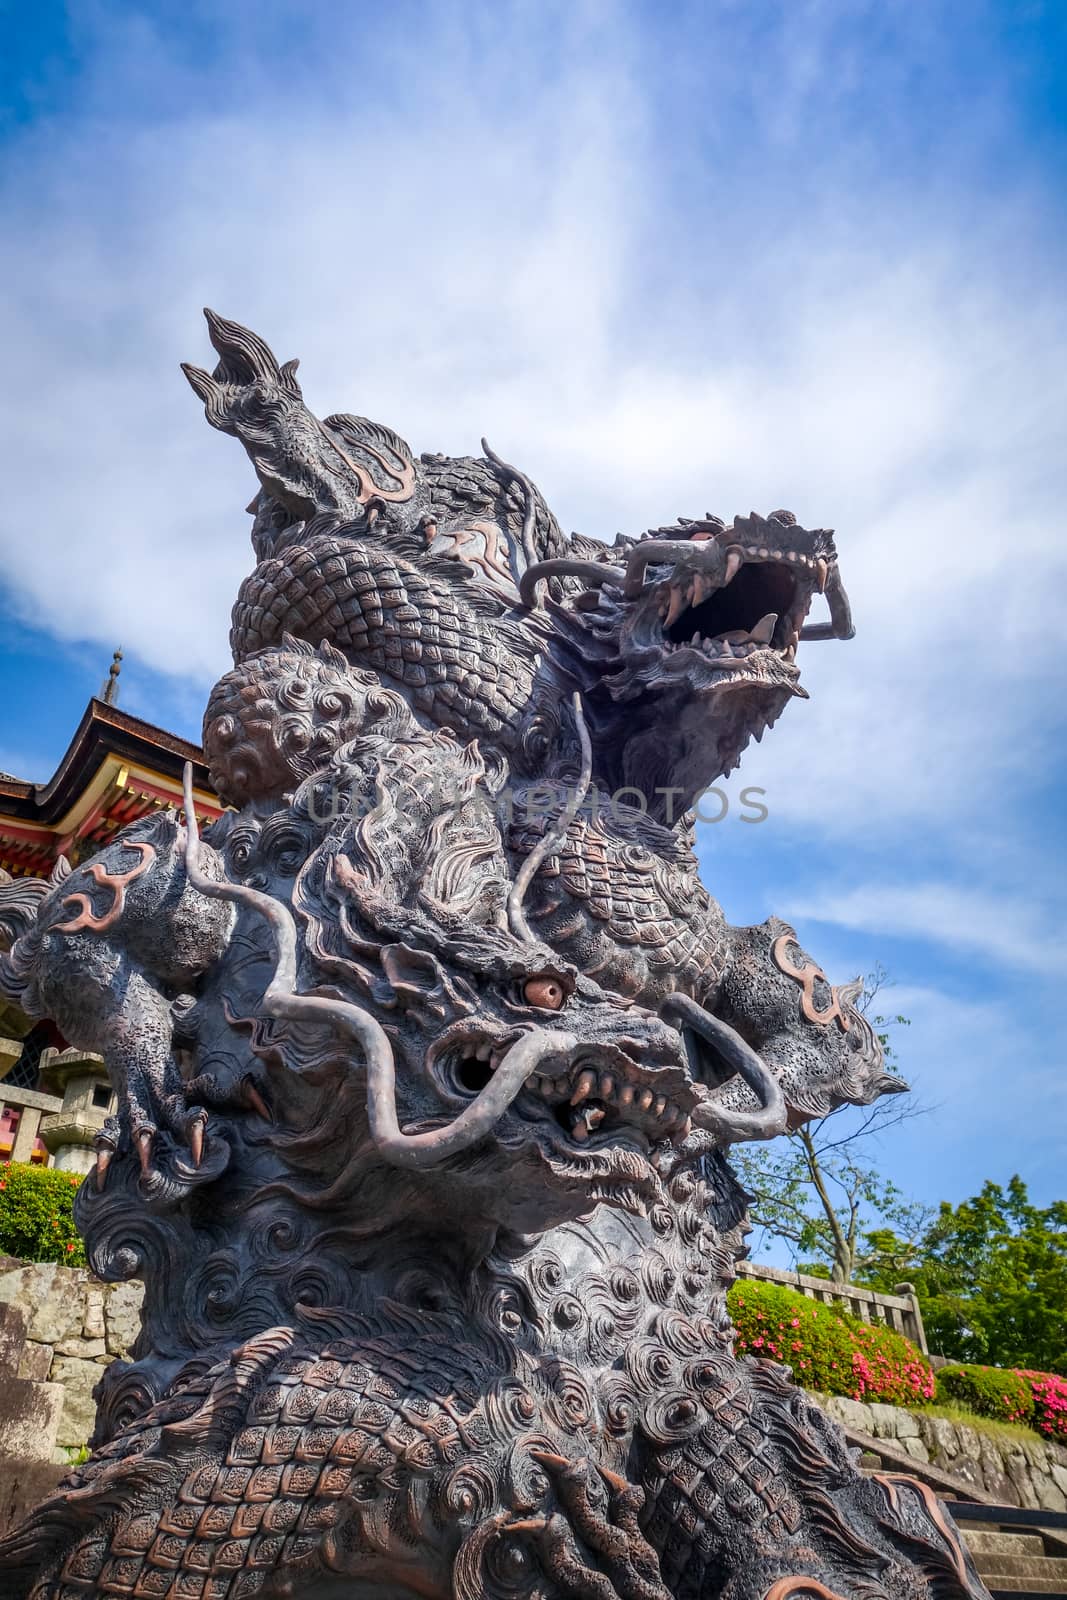 Dragon statue in front of the kiyomizu-dera temple, Kyoto, Japan by daboost